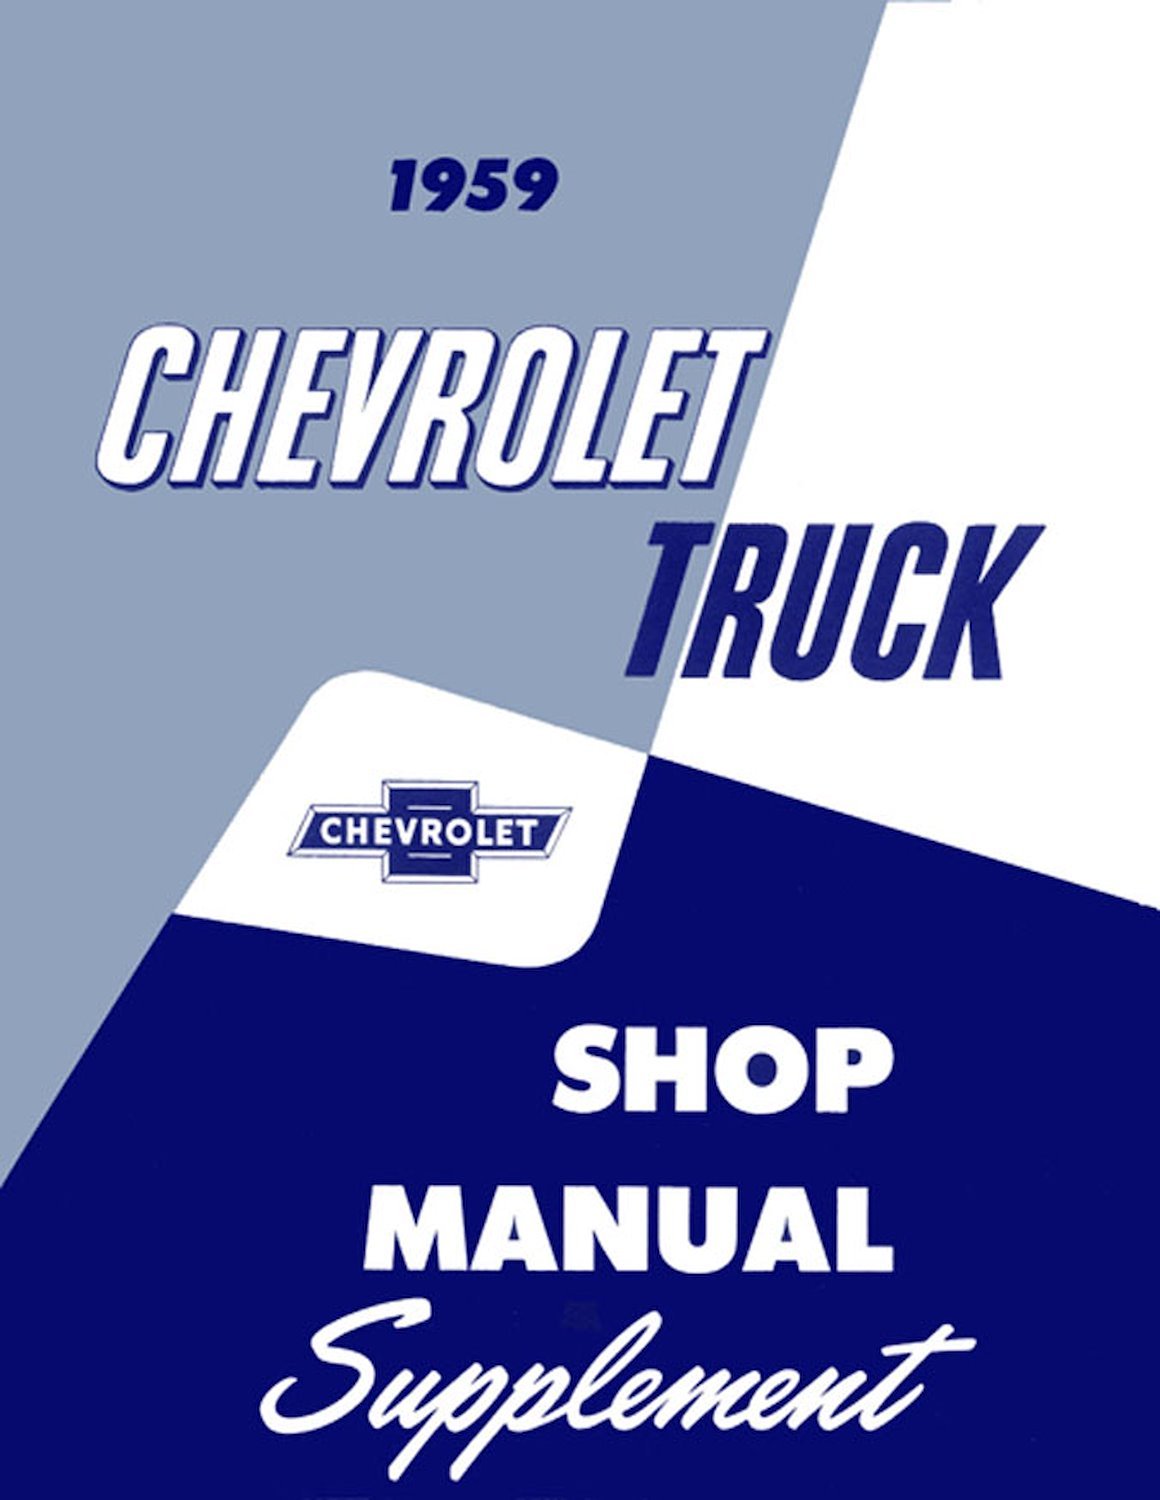 Shop Manual for 1959 Chevrolet Trucks [Supplement to 1958 Manual]